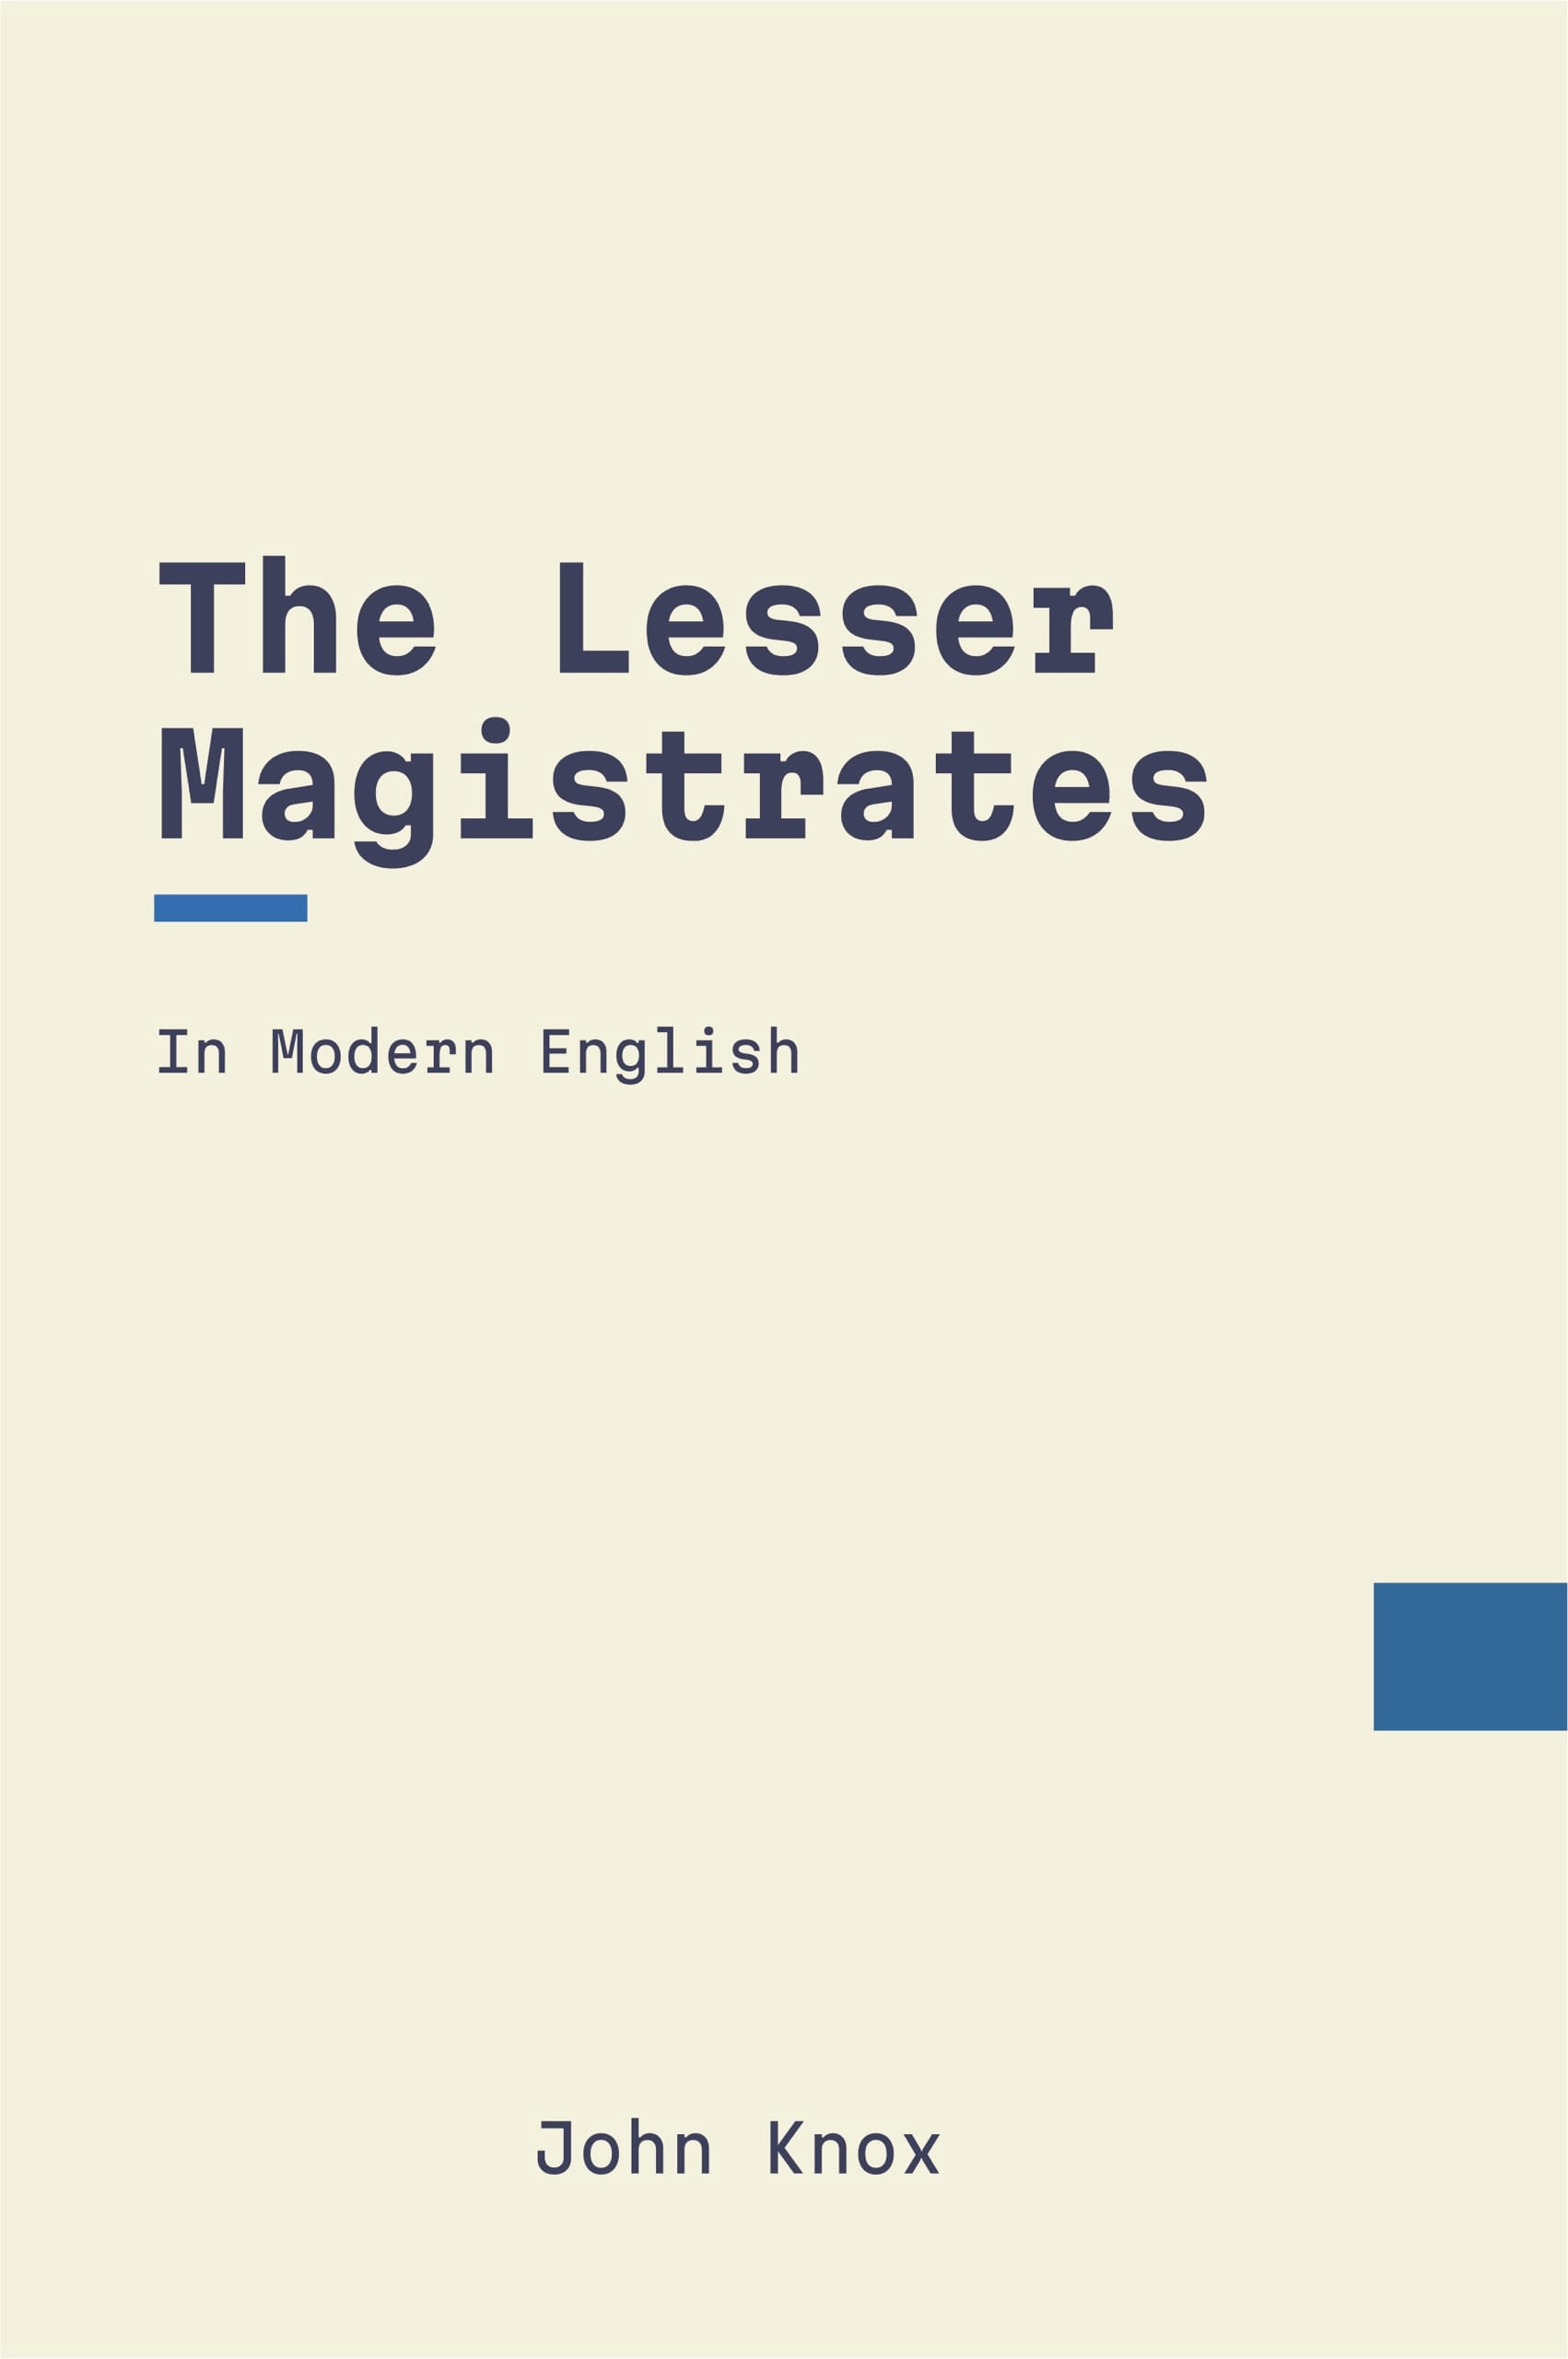 The Lesser Magistrates (The Appellation) by John Knox